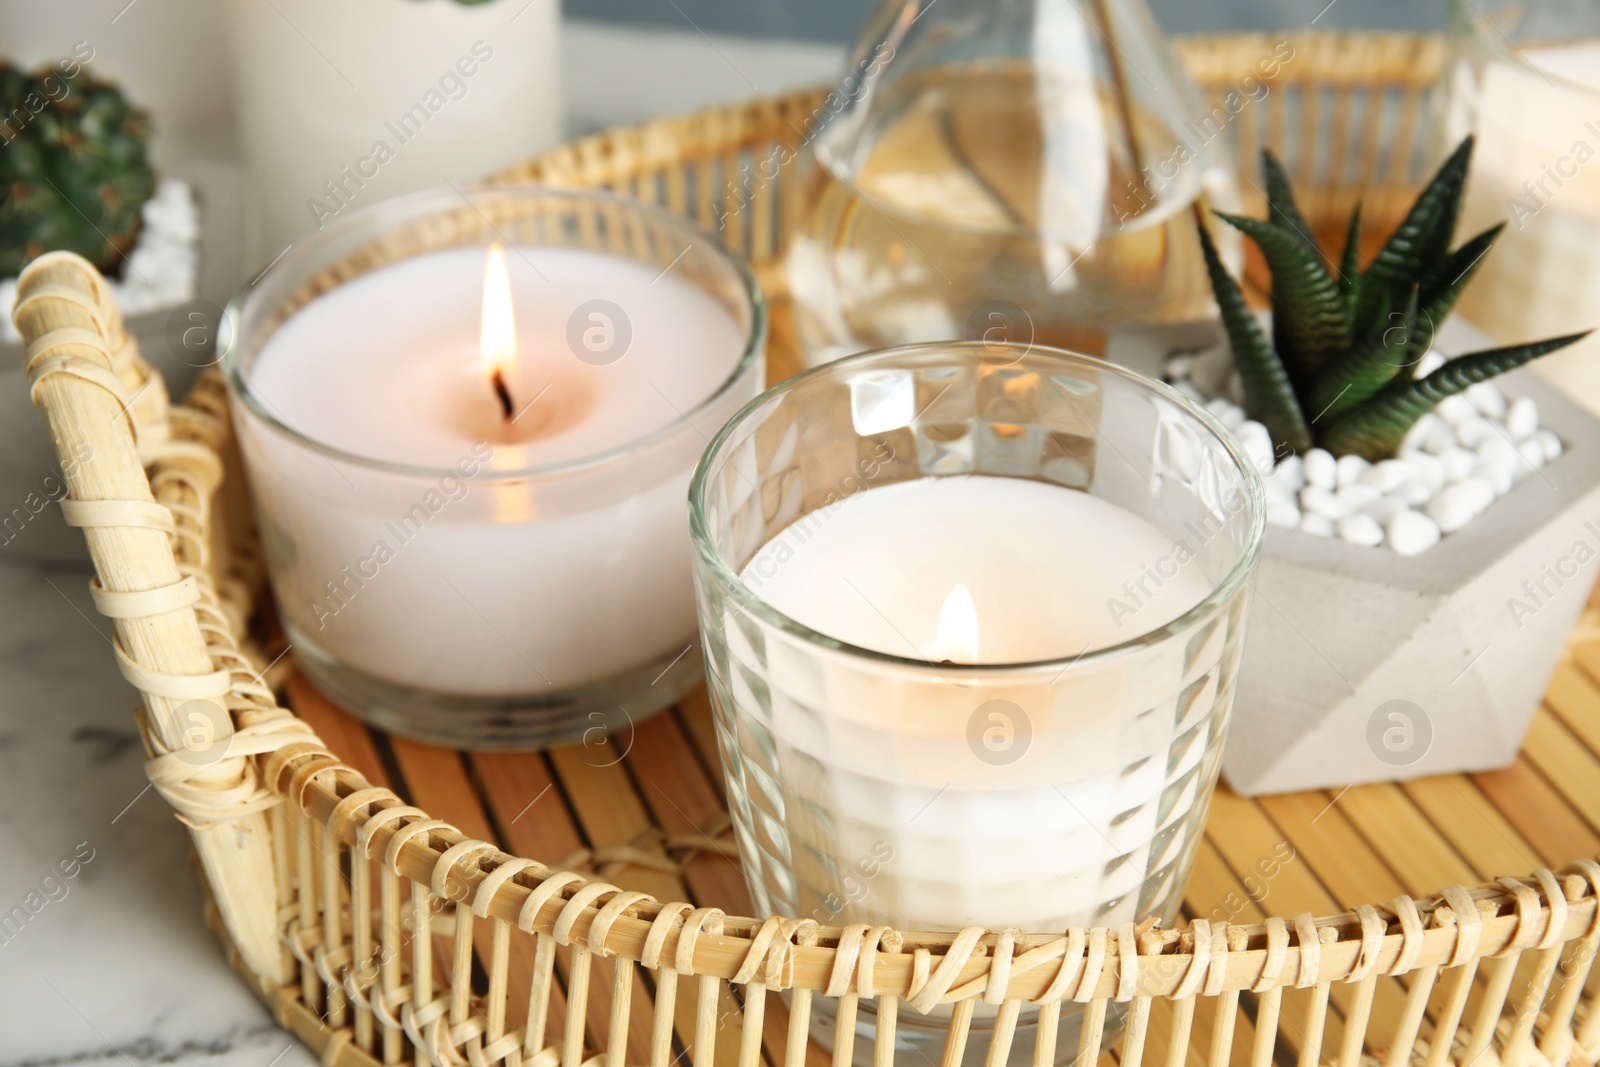 Photo of Wicker tray with burning candles and houseplant on table